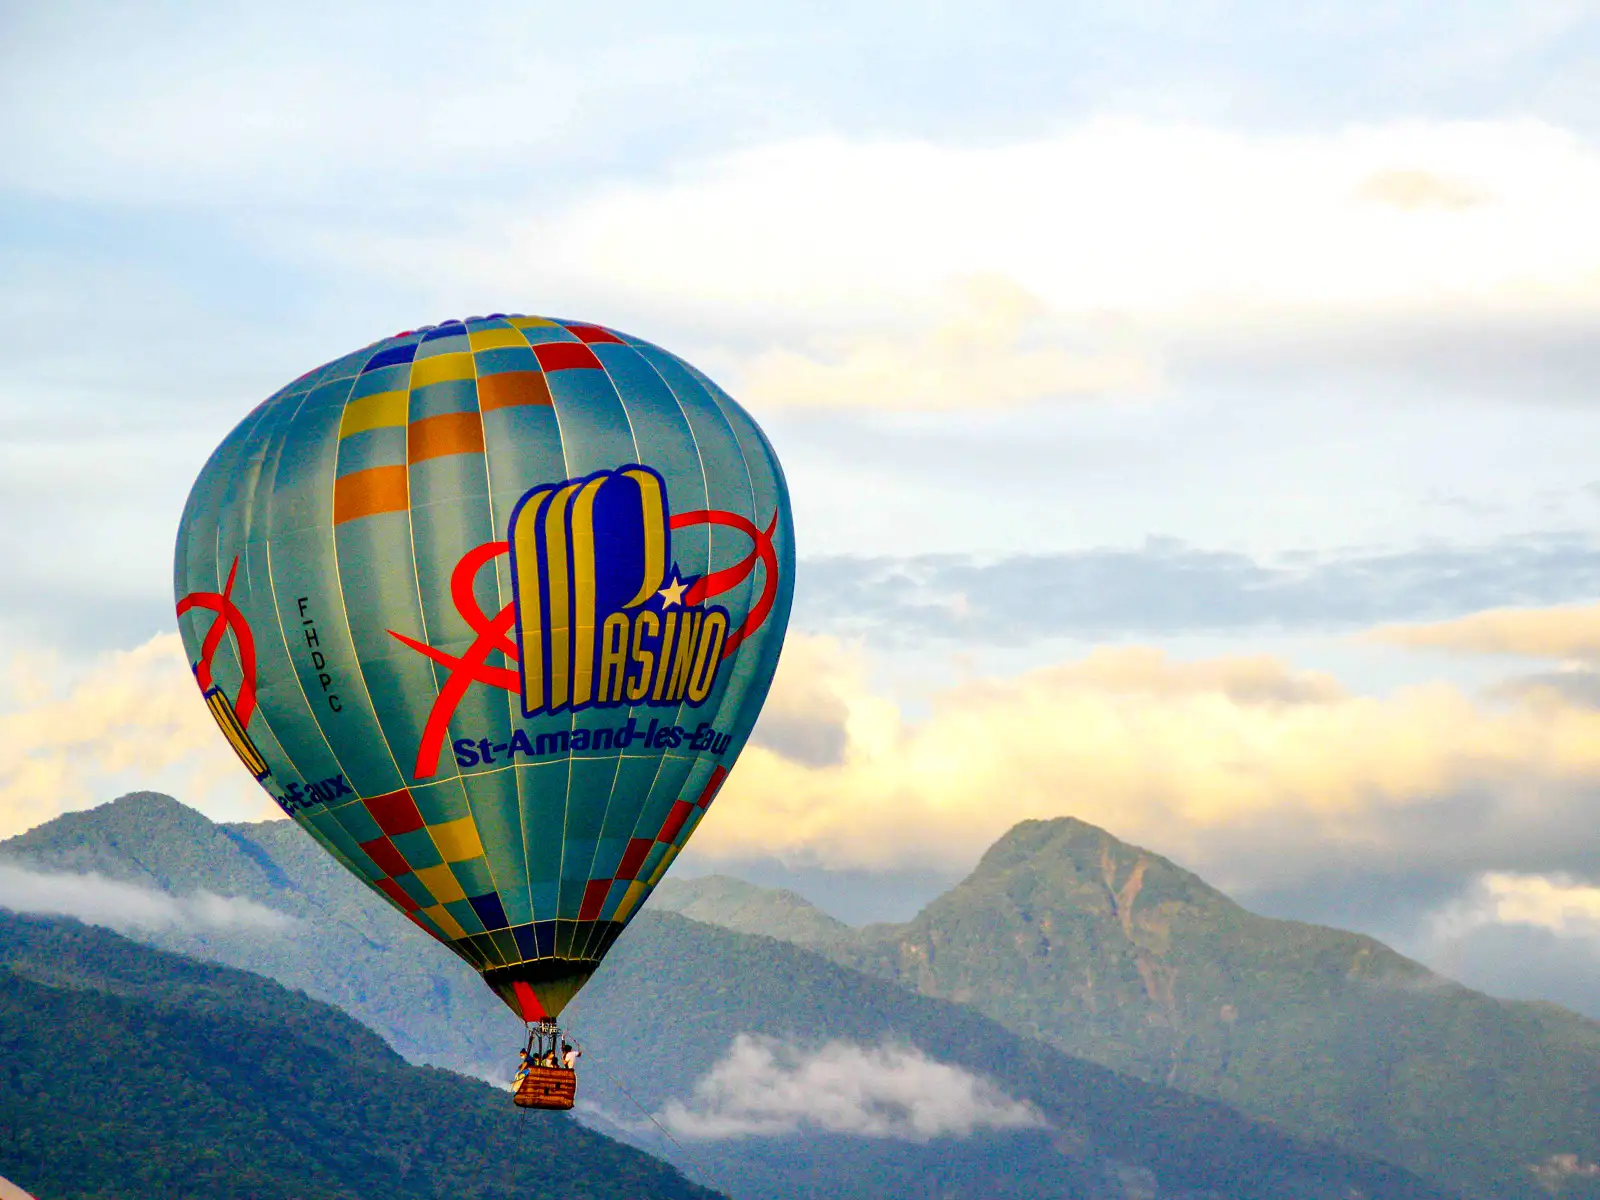 A hot air balloon on a tethered flight over Luye Highlands.